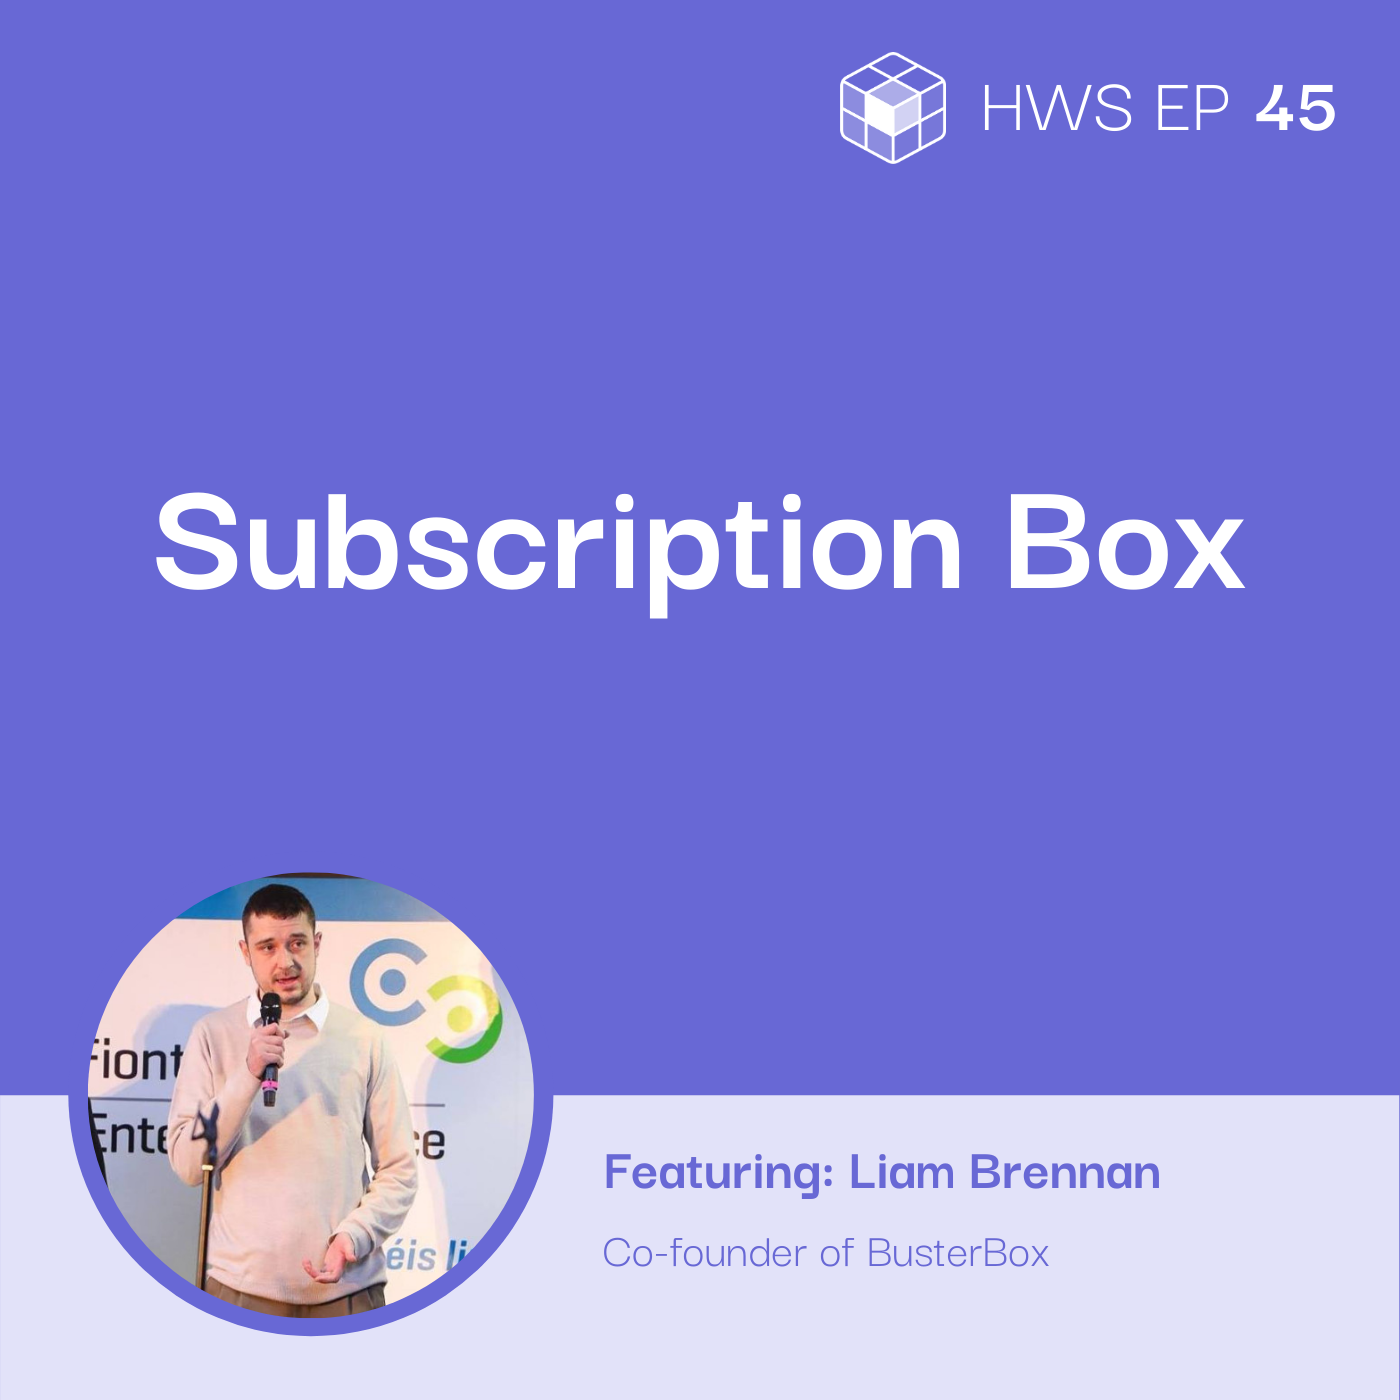 Liam Brennan shares how to start a subscription box service business